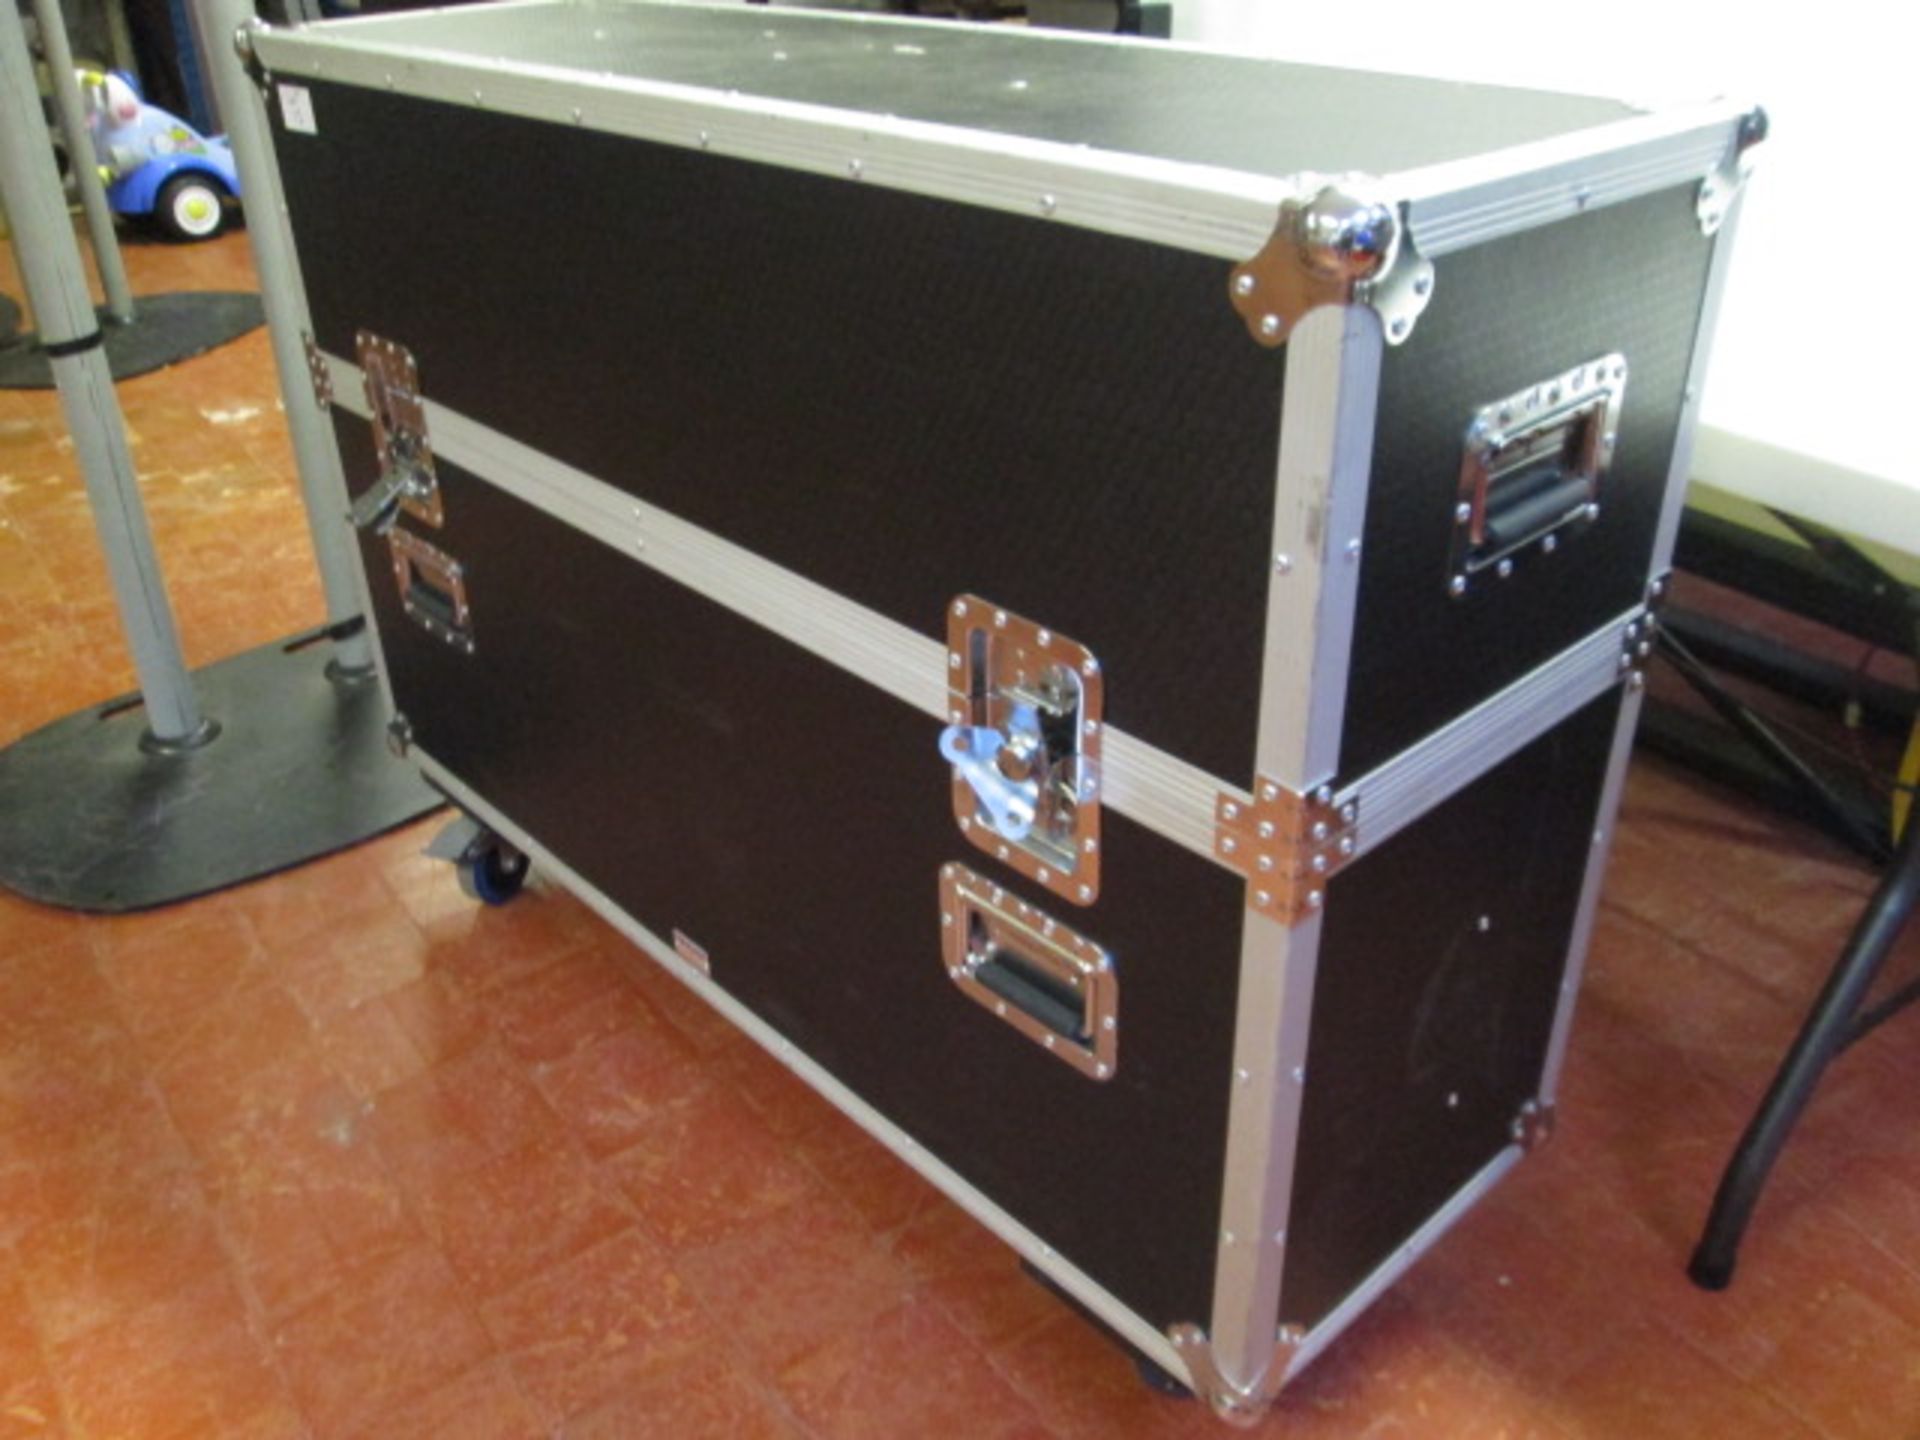 Spider Cases Flight Case. Size 124cm x 39cm x 92cm. On Lockable Wheels. (NOTE: Currently